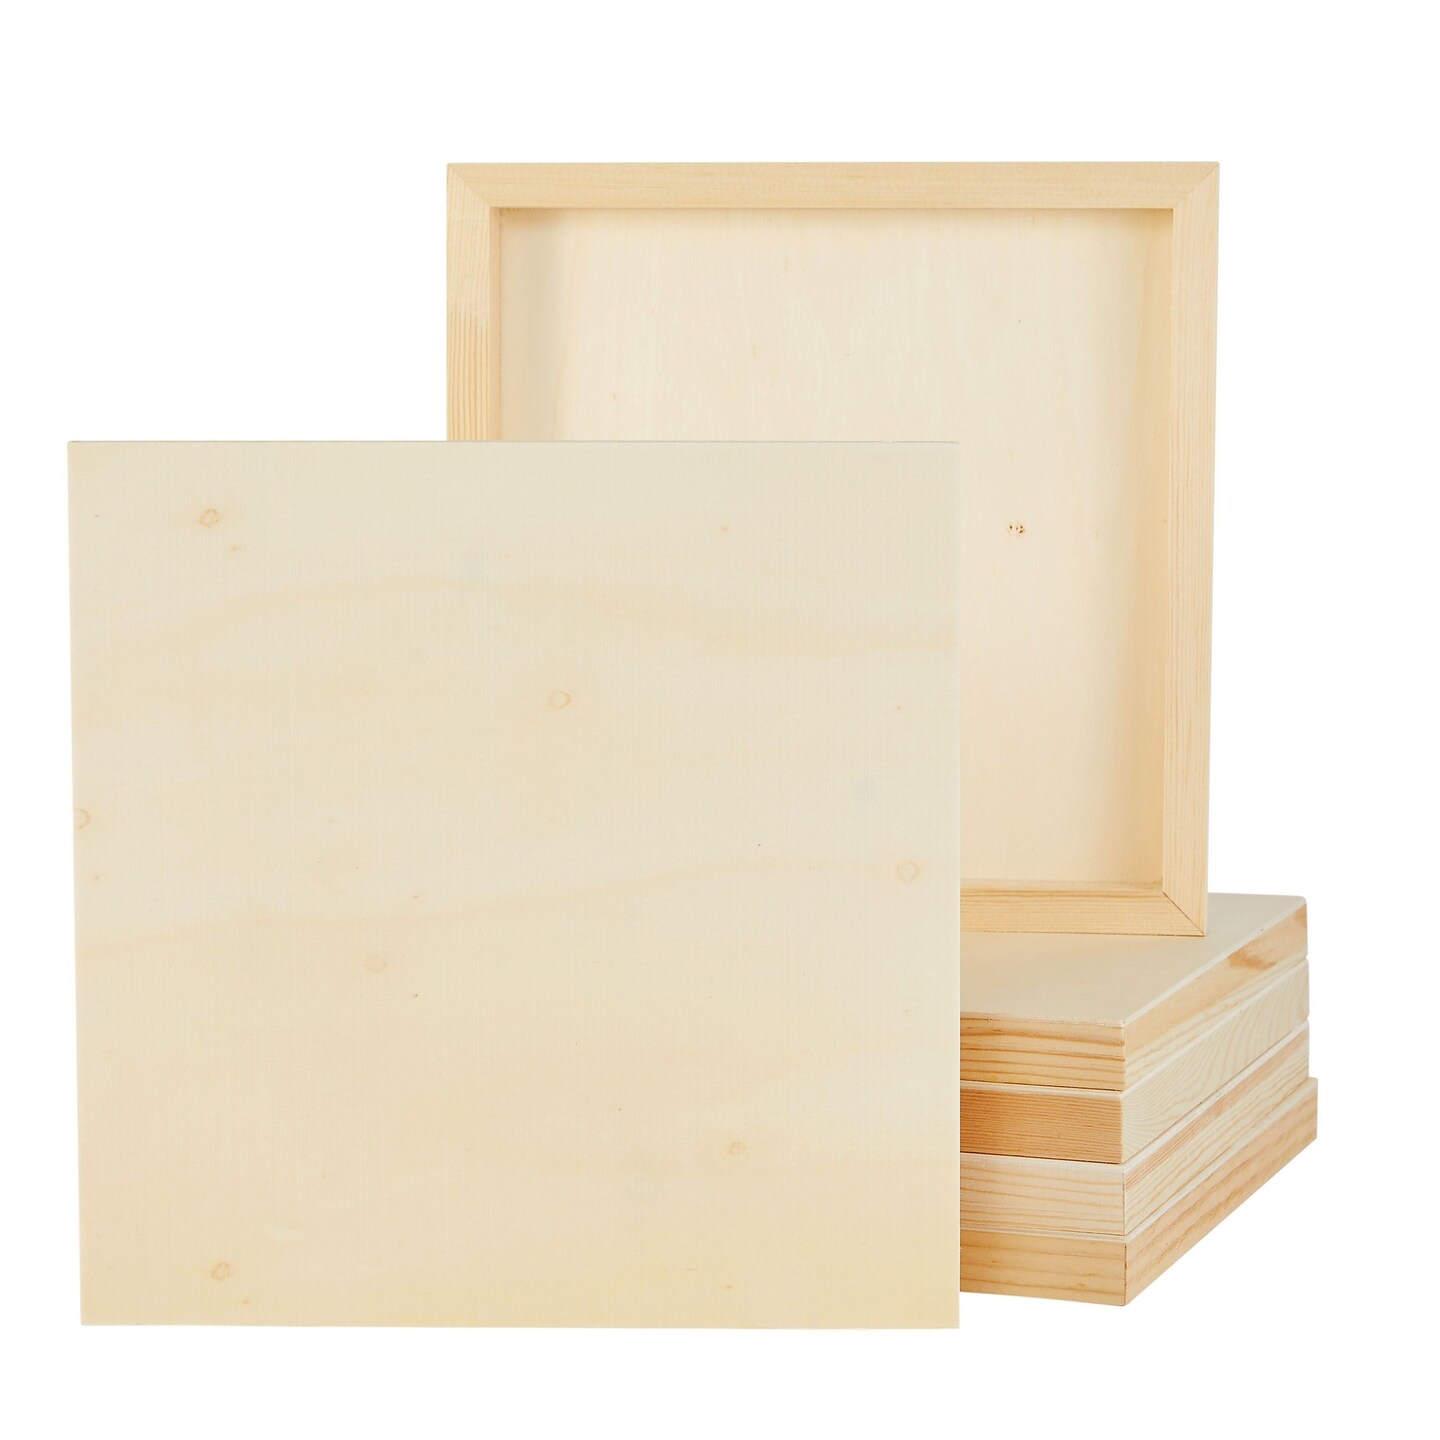 Set of 8 Unfinished Wood Canvas Boards for Painting, Wooden Panels